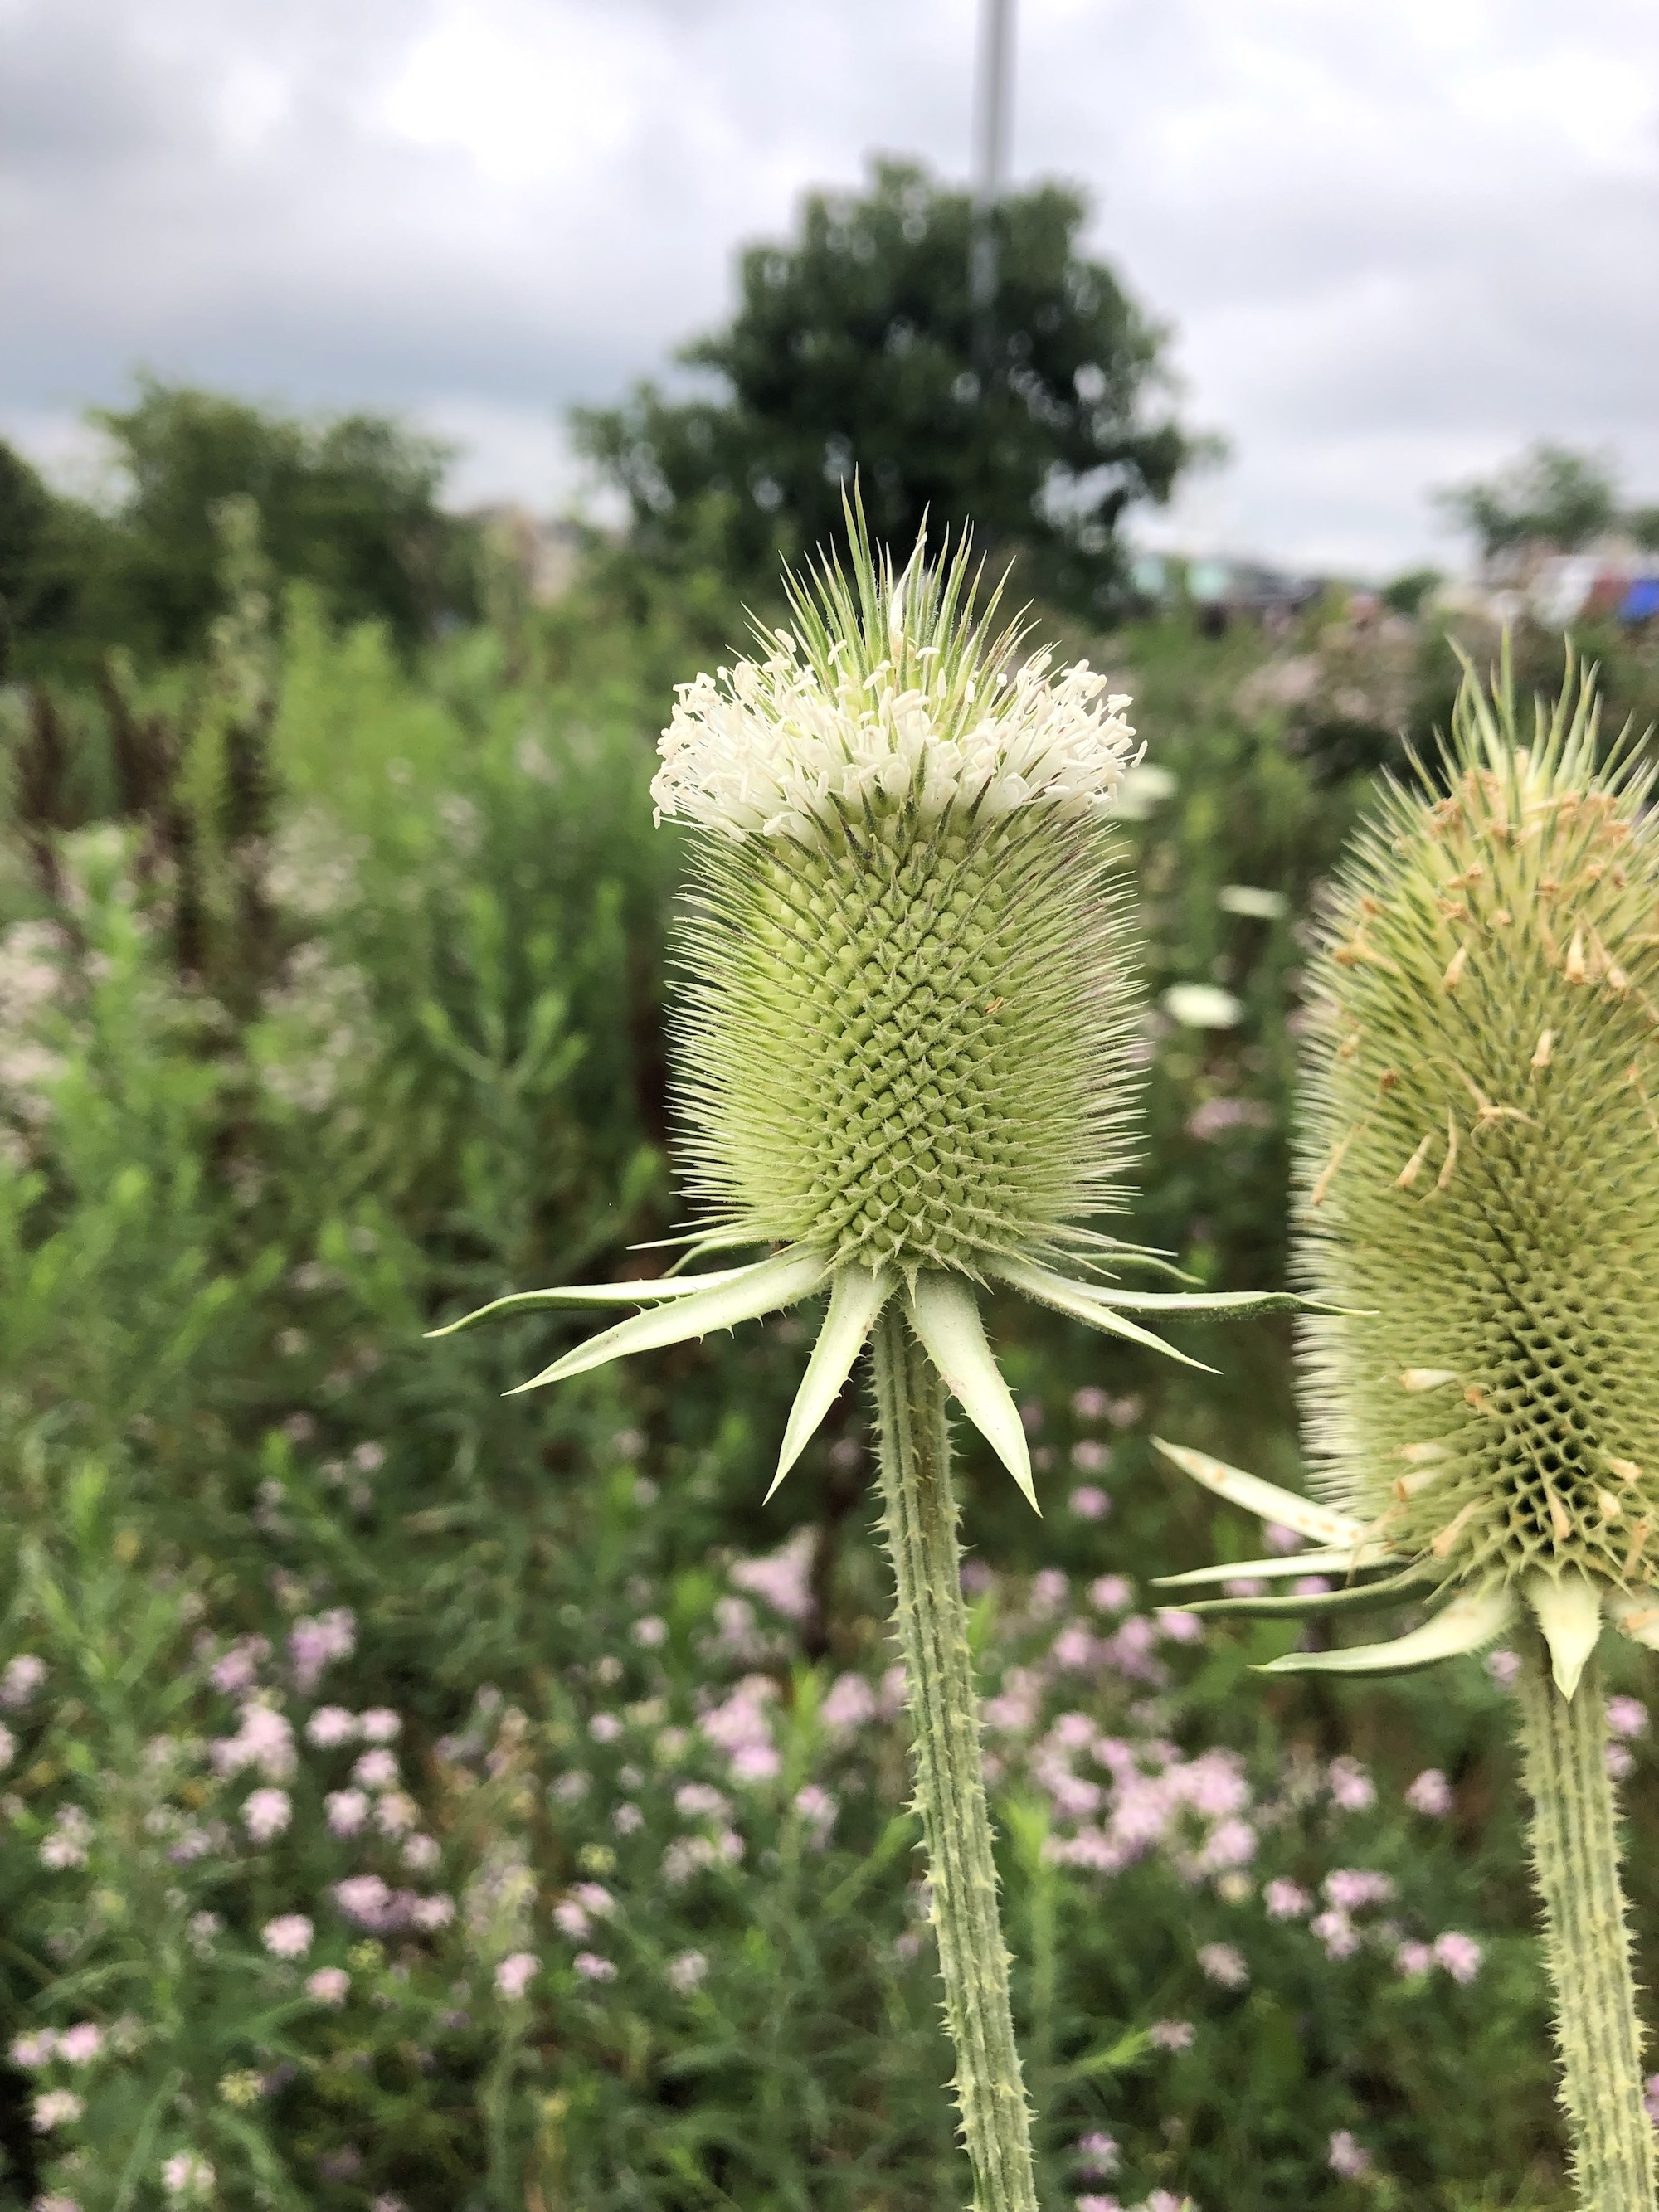 Cutleaf Teasel in wild area between GHC Hatchery Hill Clinic parking lot and Cahill Main Road in Madison, Wisconsin on July 13, 2021.